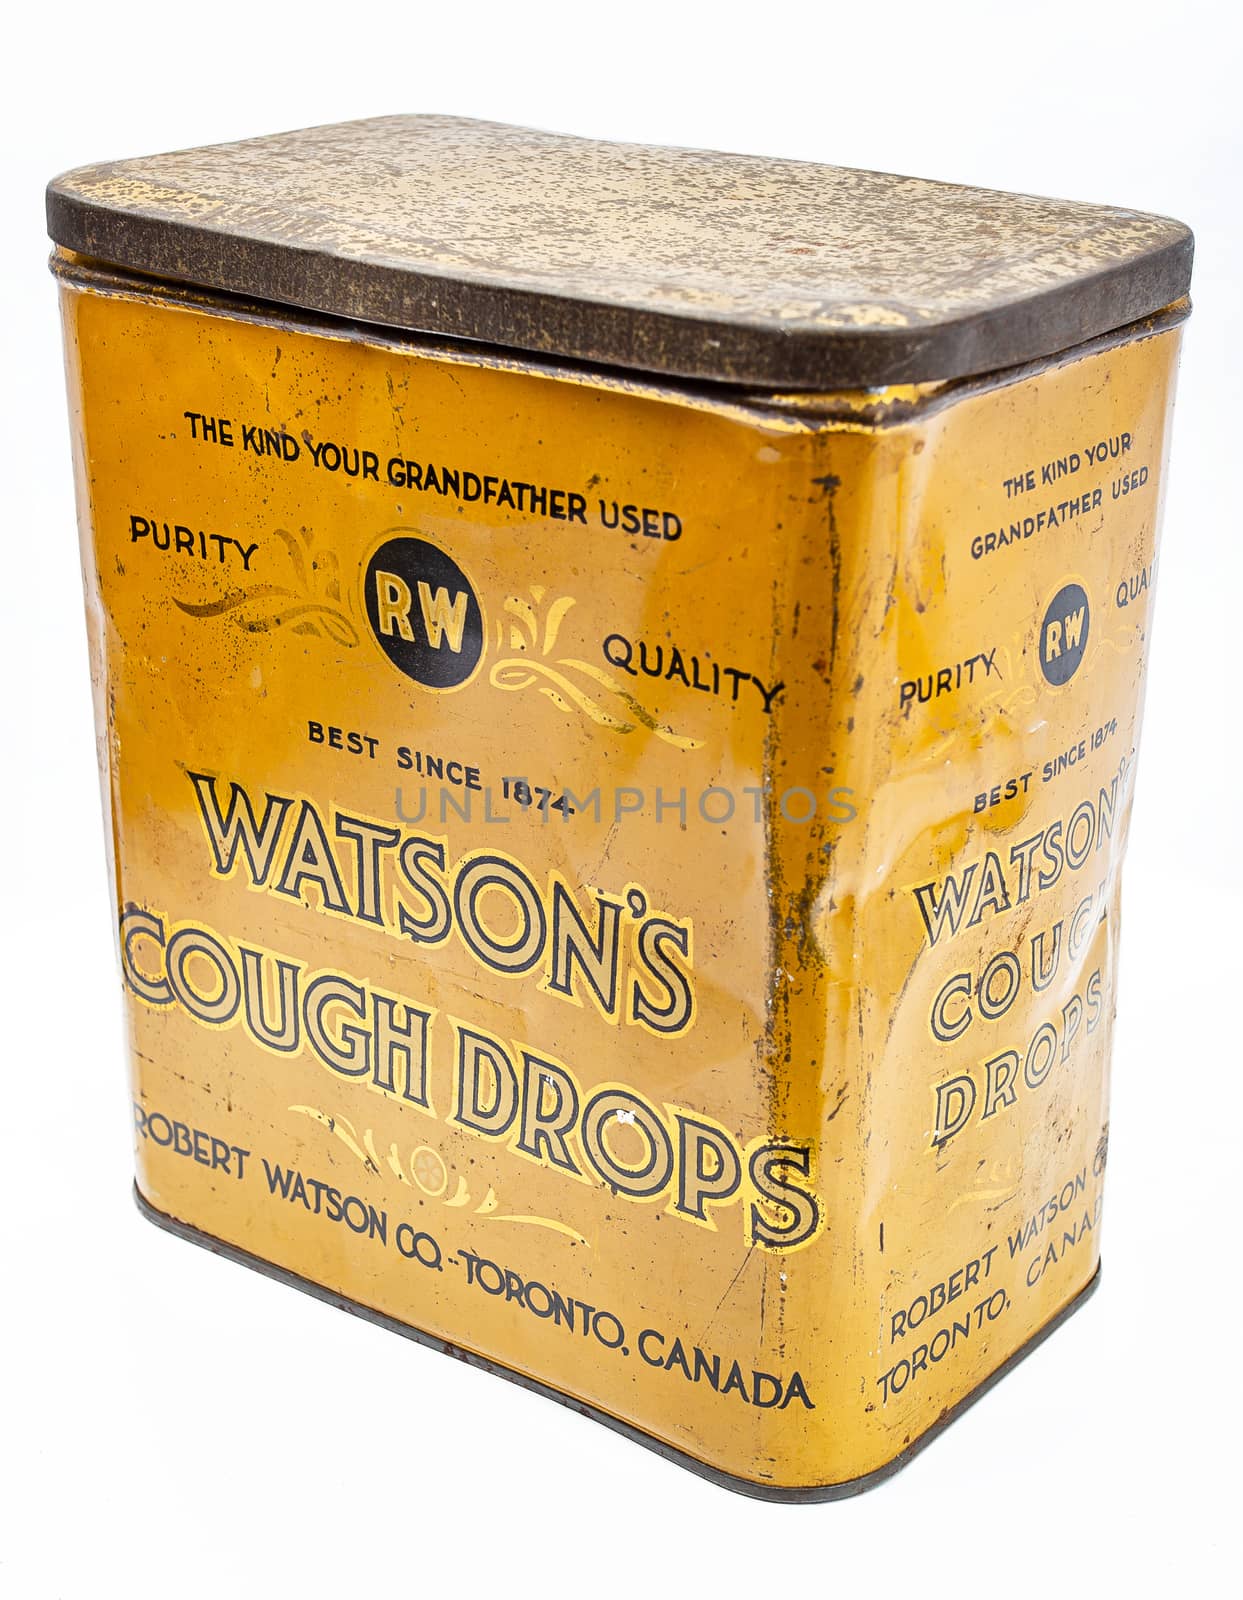 Cough drop box with vintage design against white background